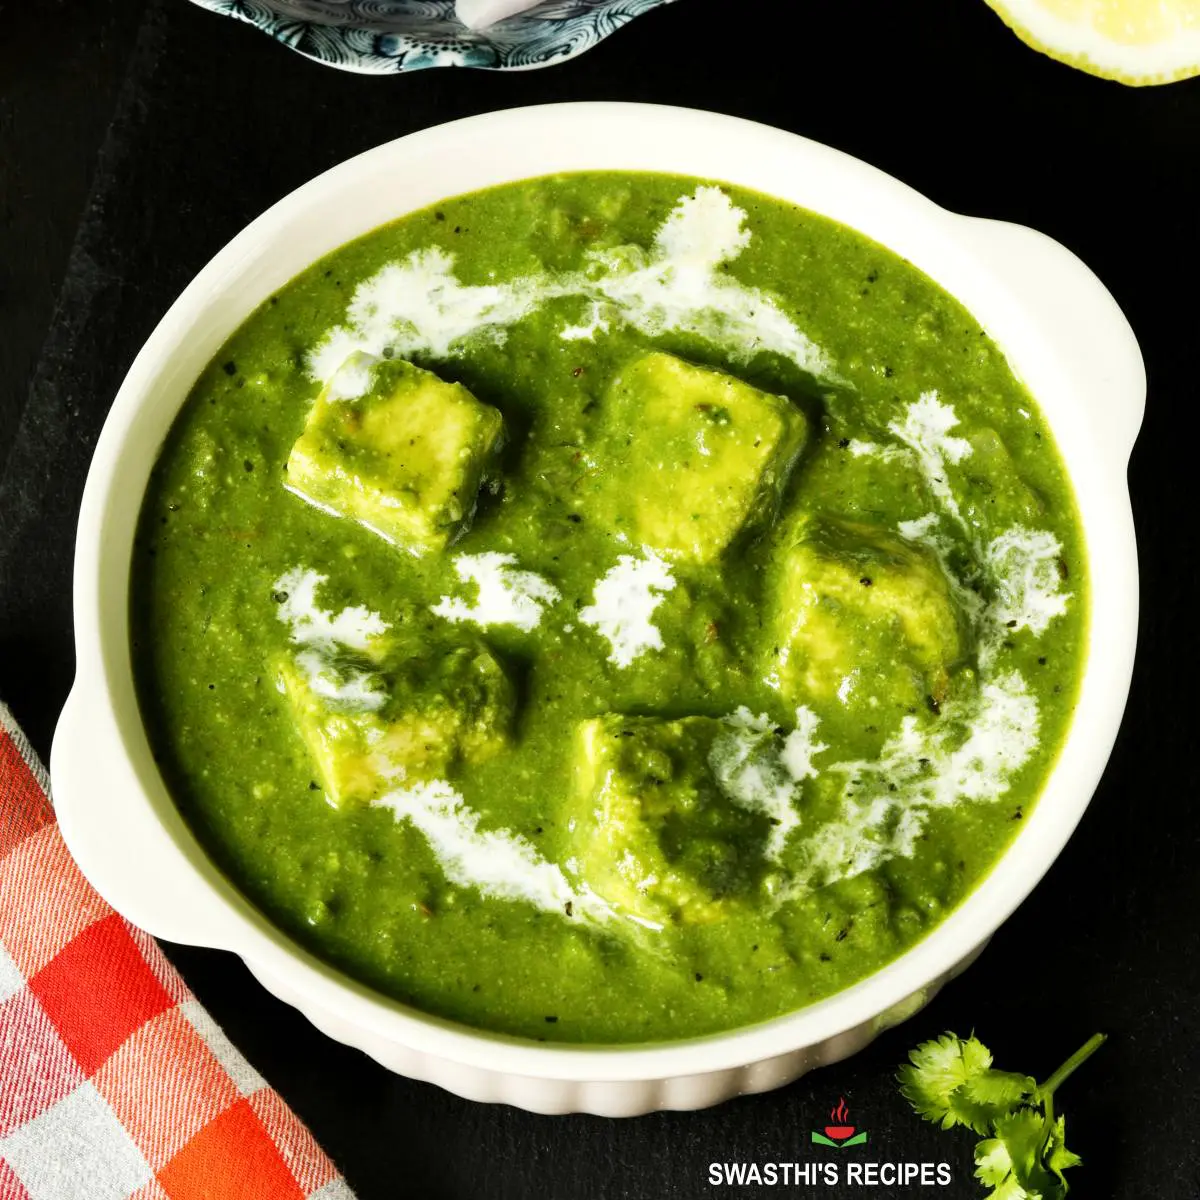 palak paneer made with spinach, paneer and spices